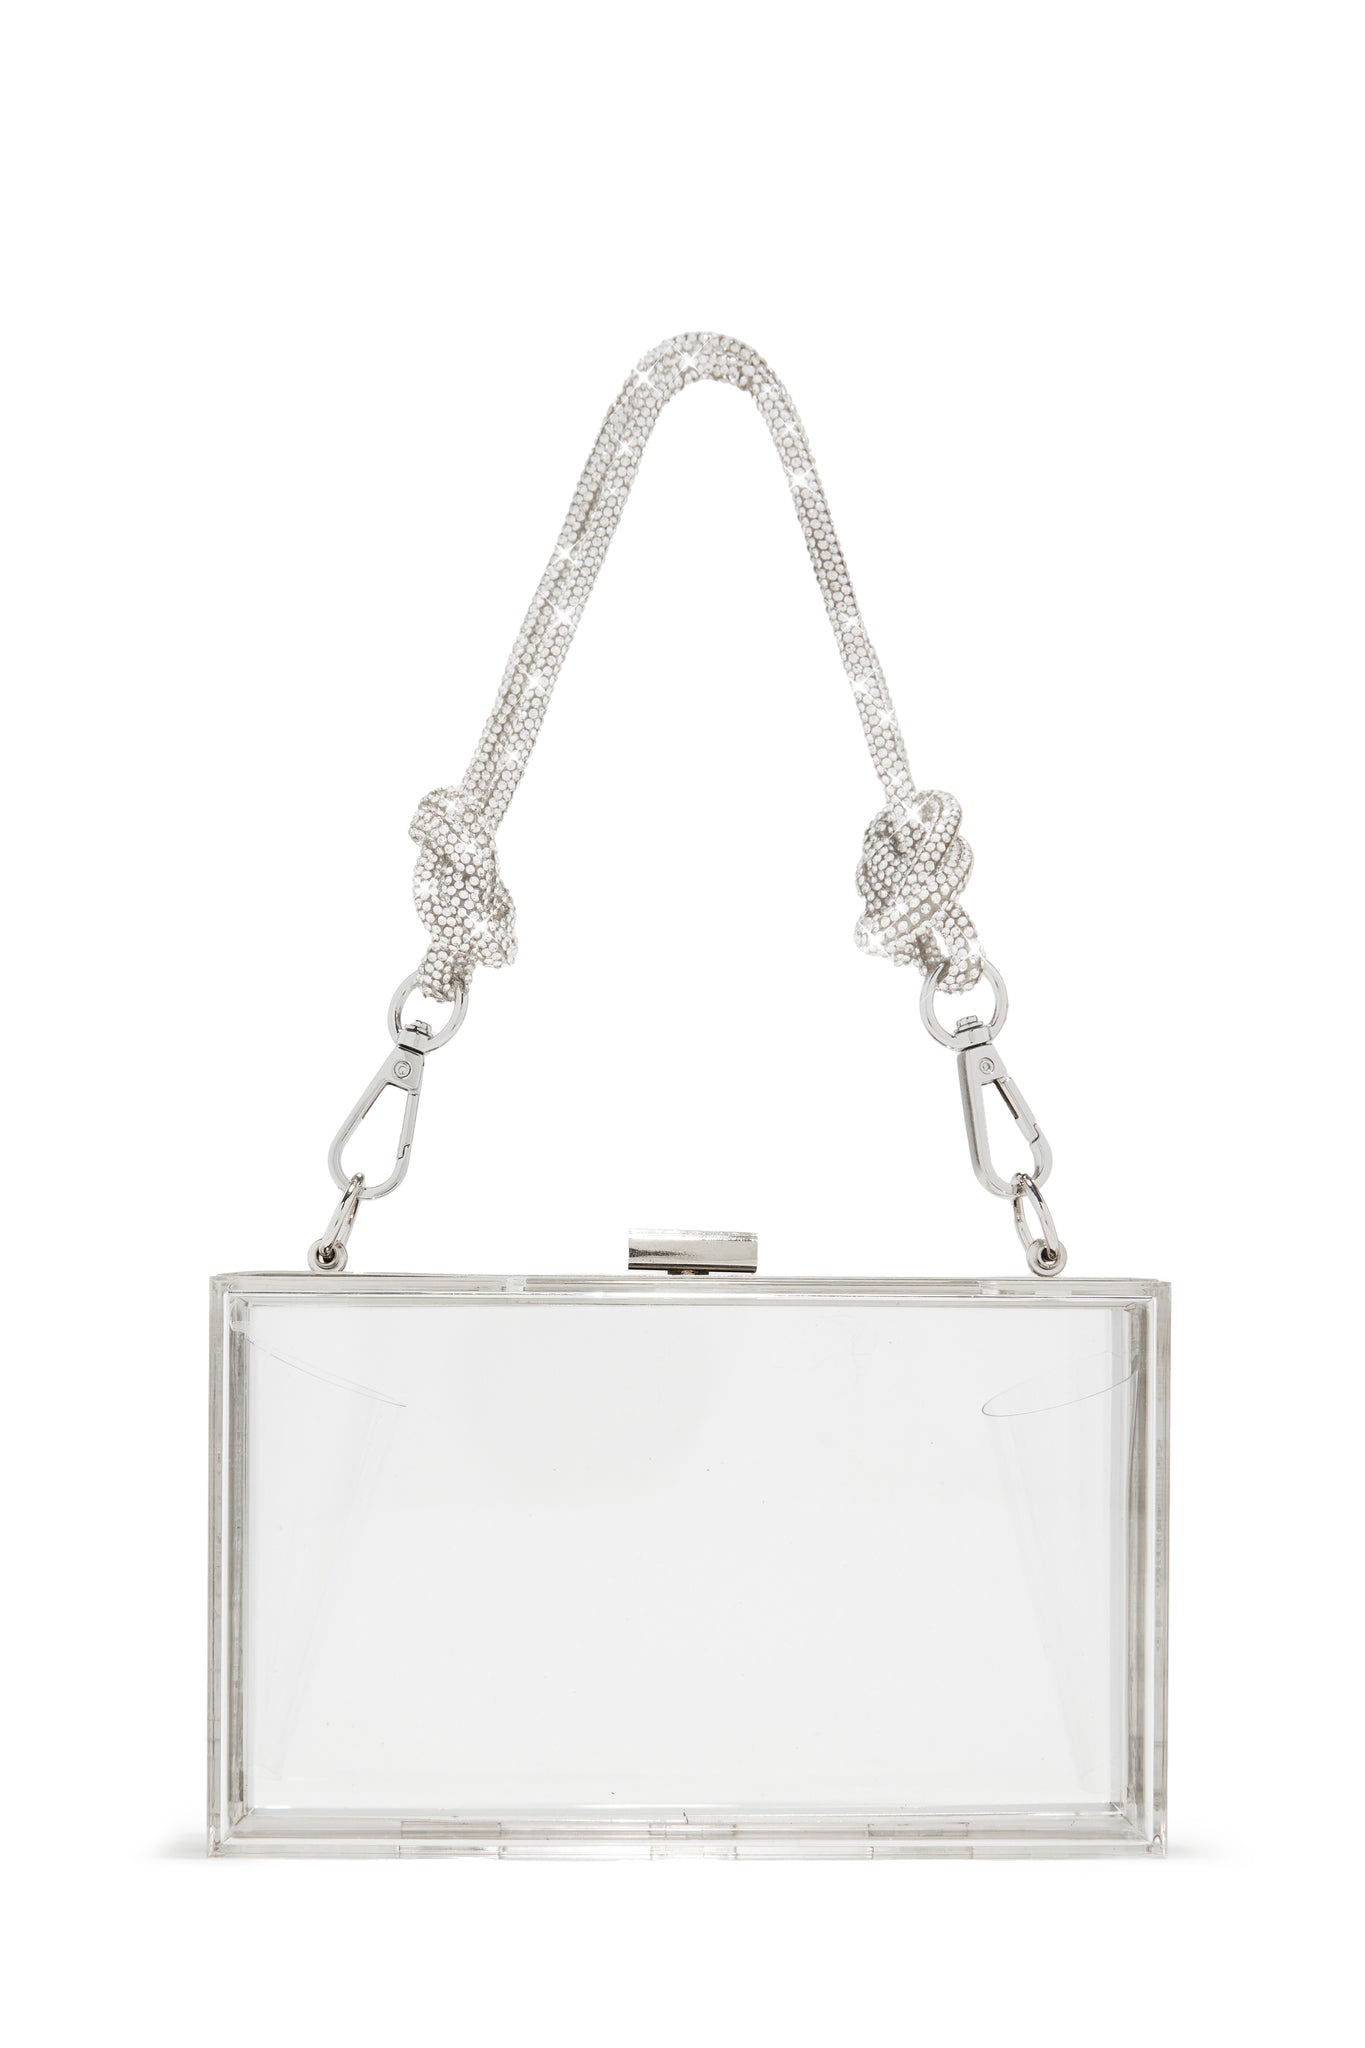 Acrylic Bubble Top Handle Clear Clutch Bag With Transparent Chain |  Baginning